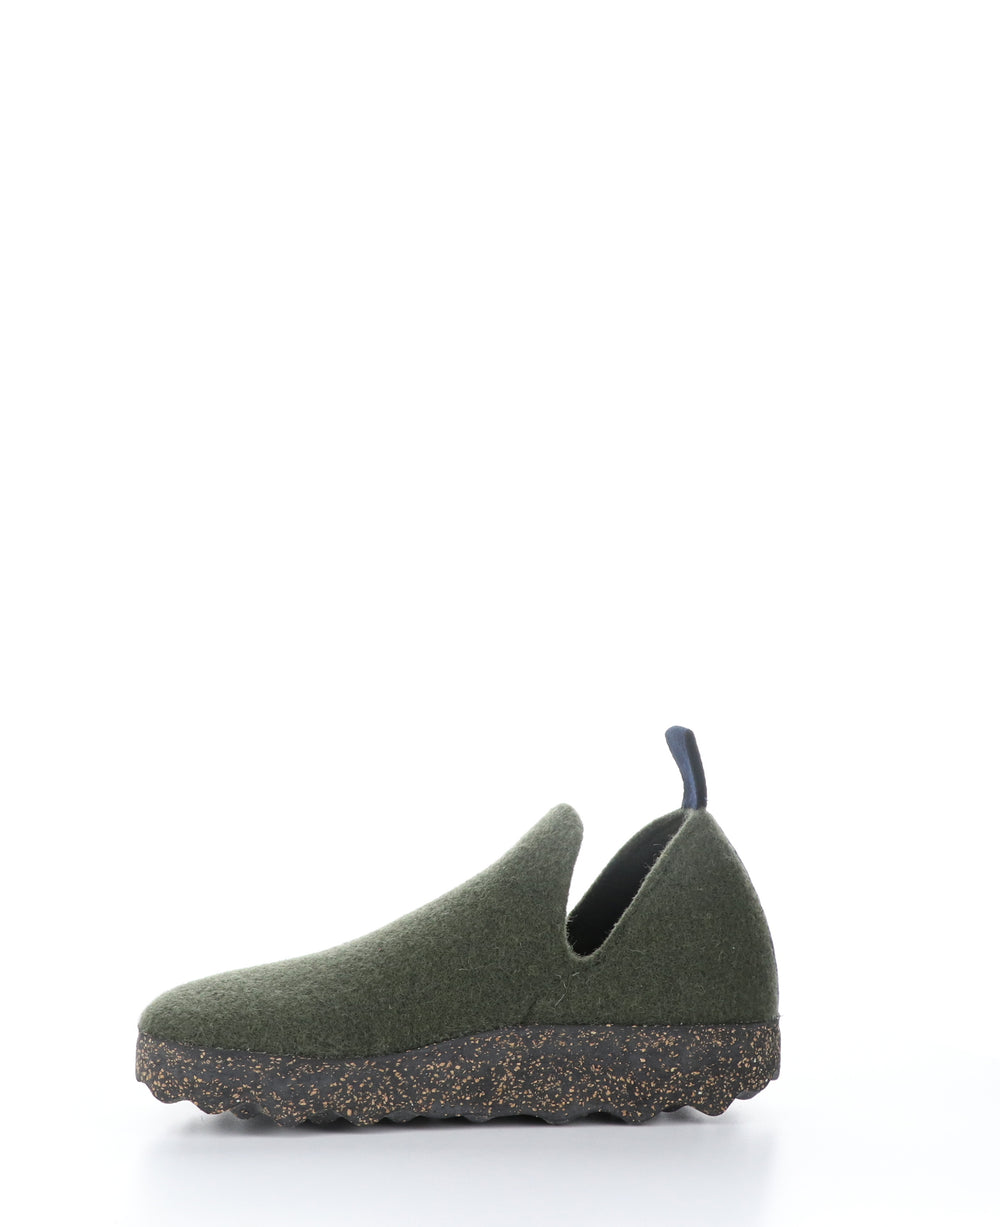 CITYM Military Green Round Toe Shoes